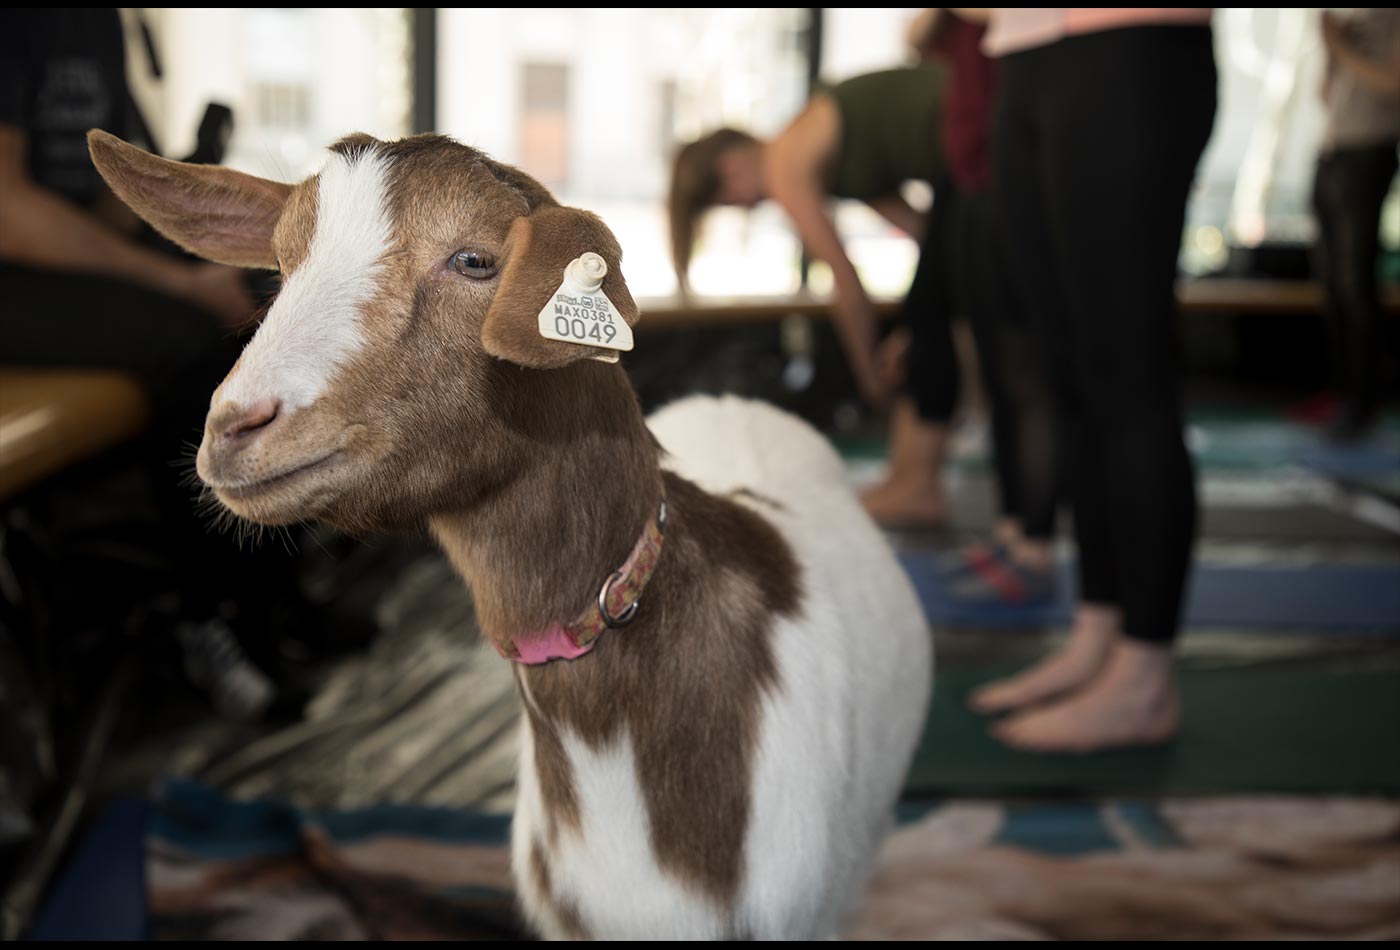 A brown and white goat.